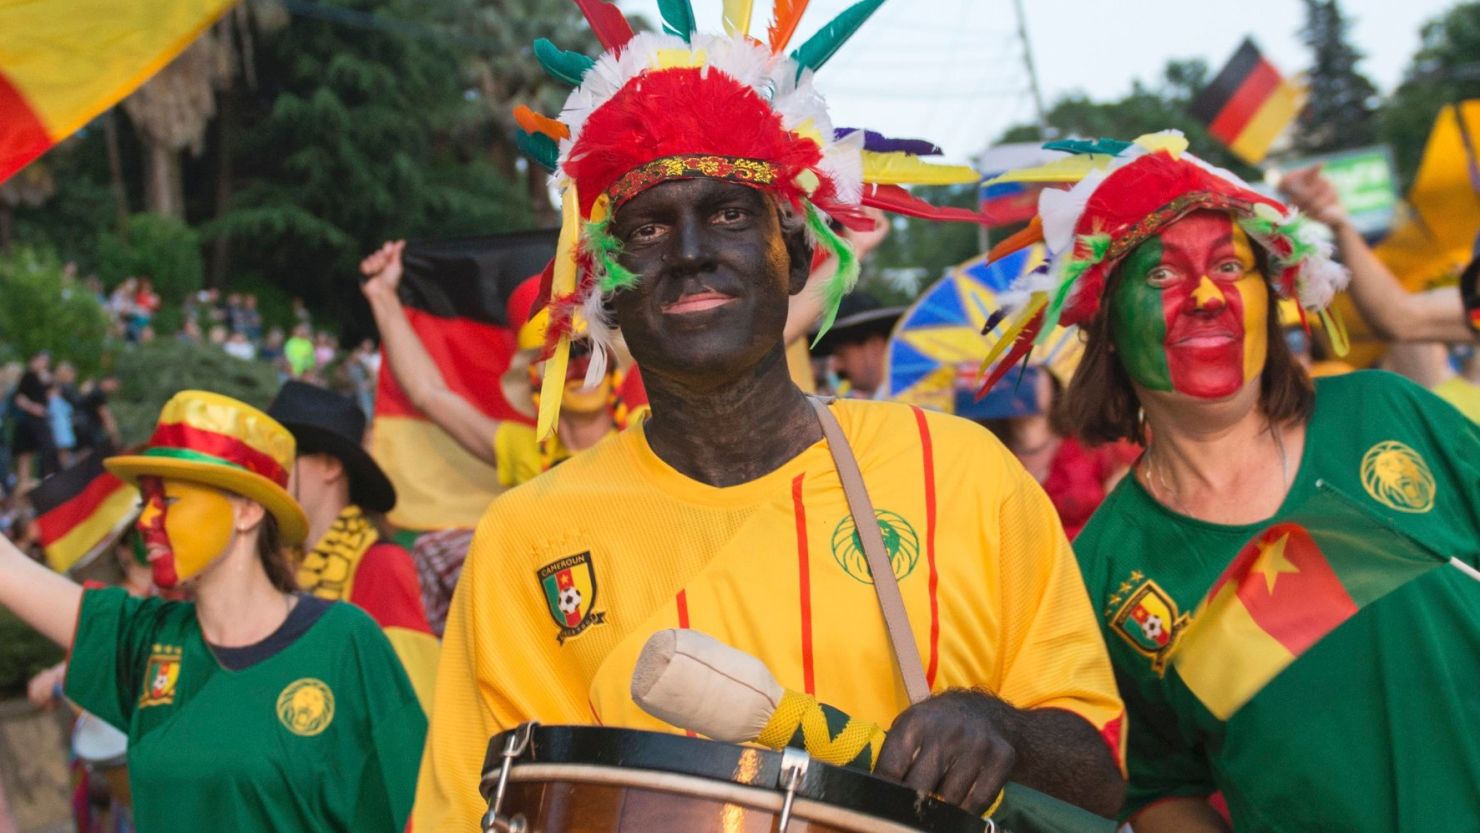 People in blackface and carry bananas while marching in a government-backed parade in Sochi, Russia on May 27. The city will host one of Cameroon's matches at the Confederations Cup soccer tournament  